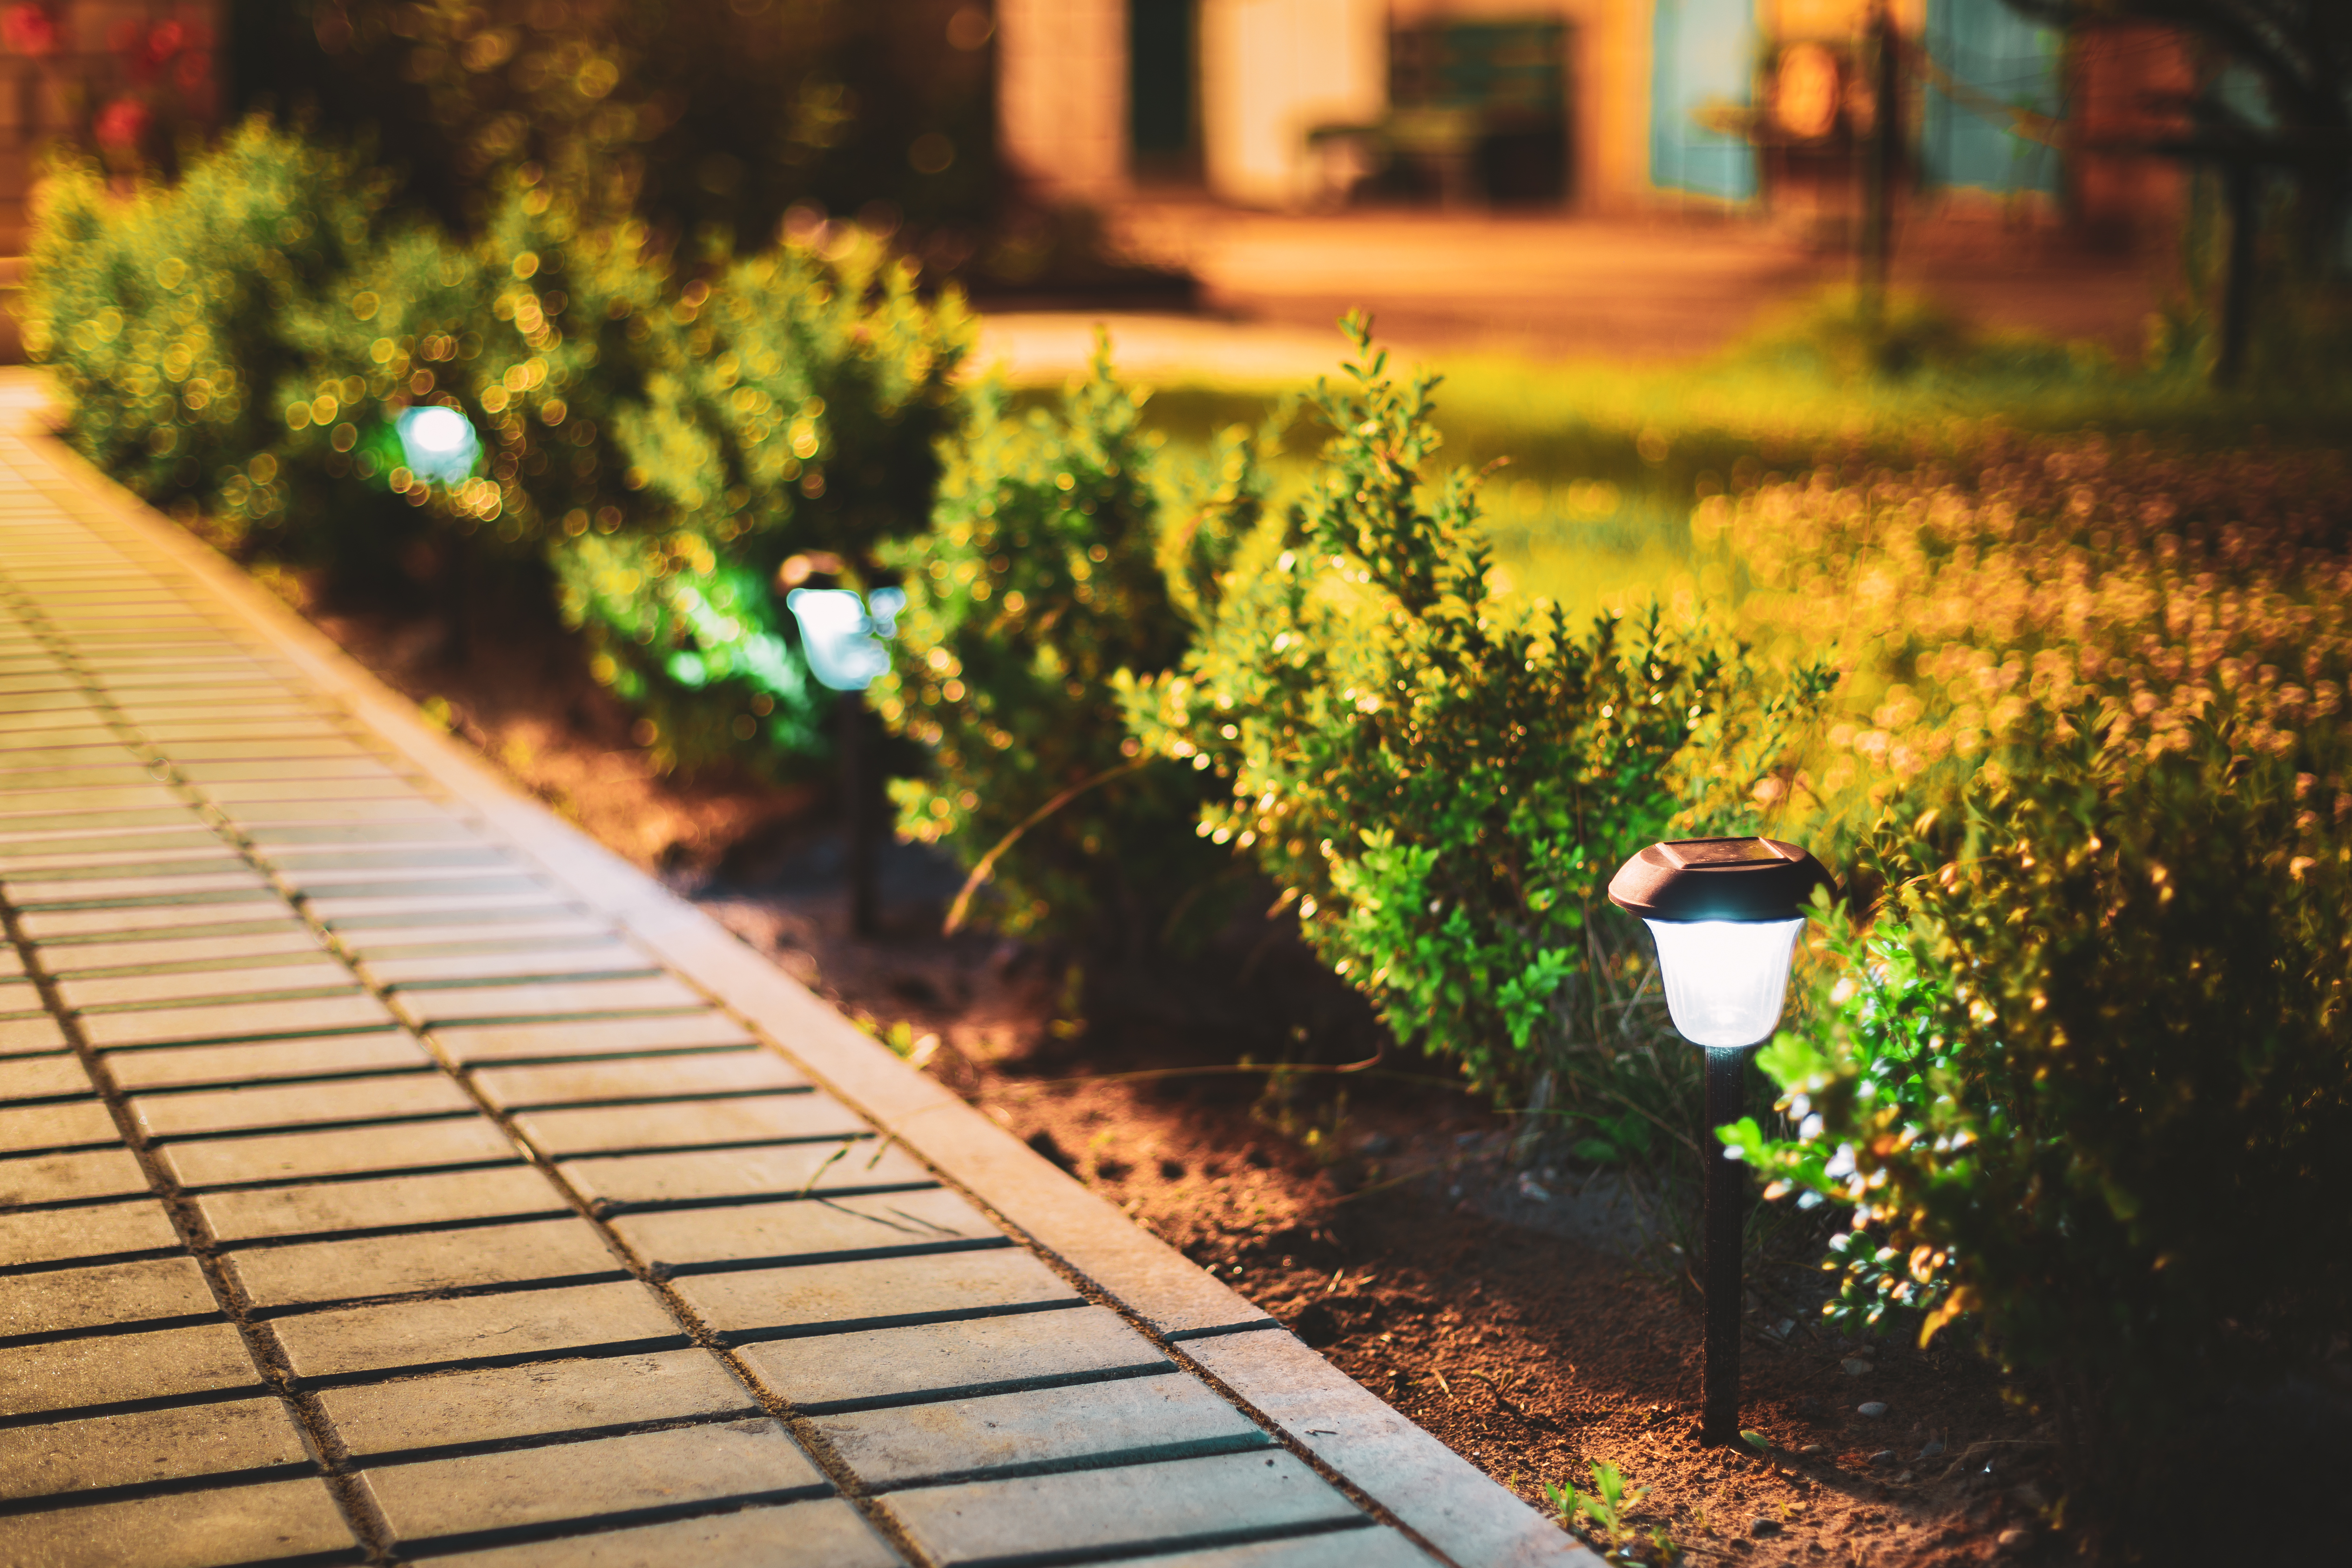 Night View Of Flowerbed Illuminated By Energy-Saving Solar Powered Lanterns Along The Path Causeway On Courtyard Going To House